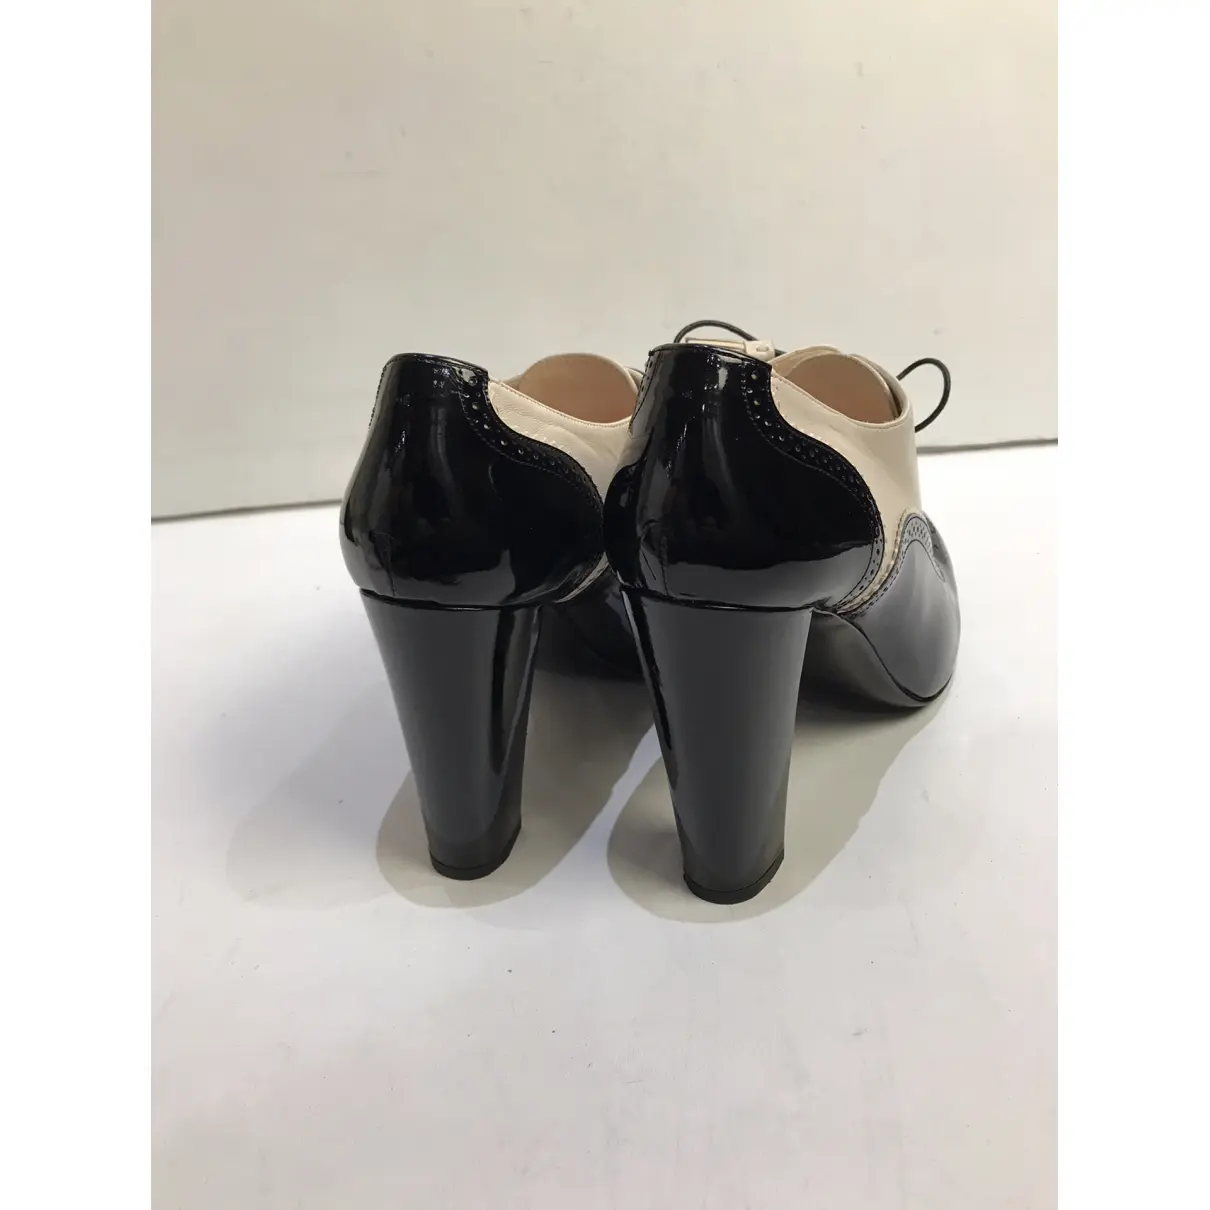 Buy Bally Patent leather heels online